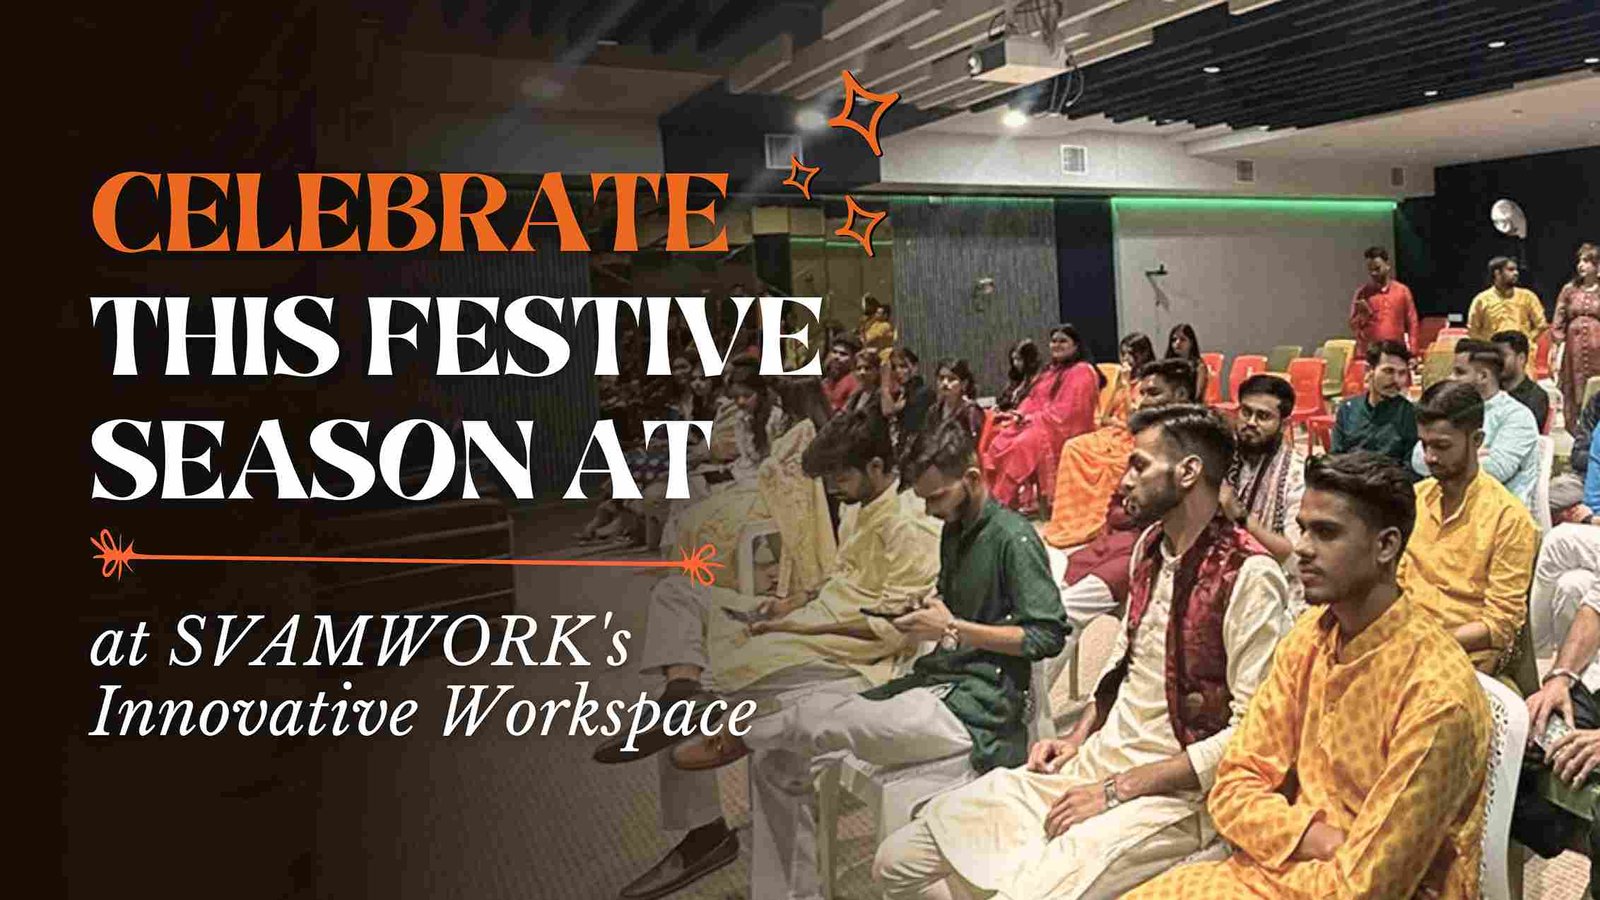 Experience a New Way of Working This Festive Season With SVAMWORK